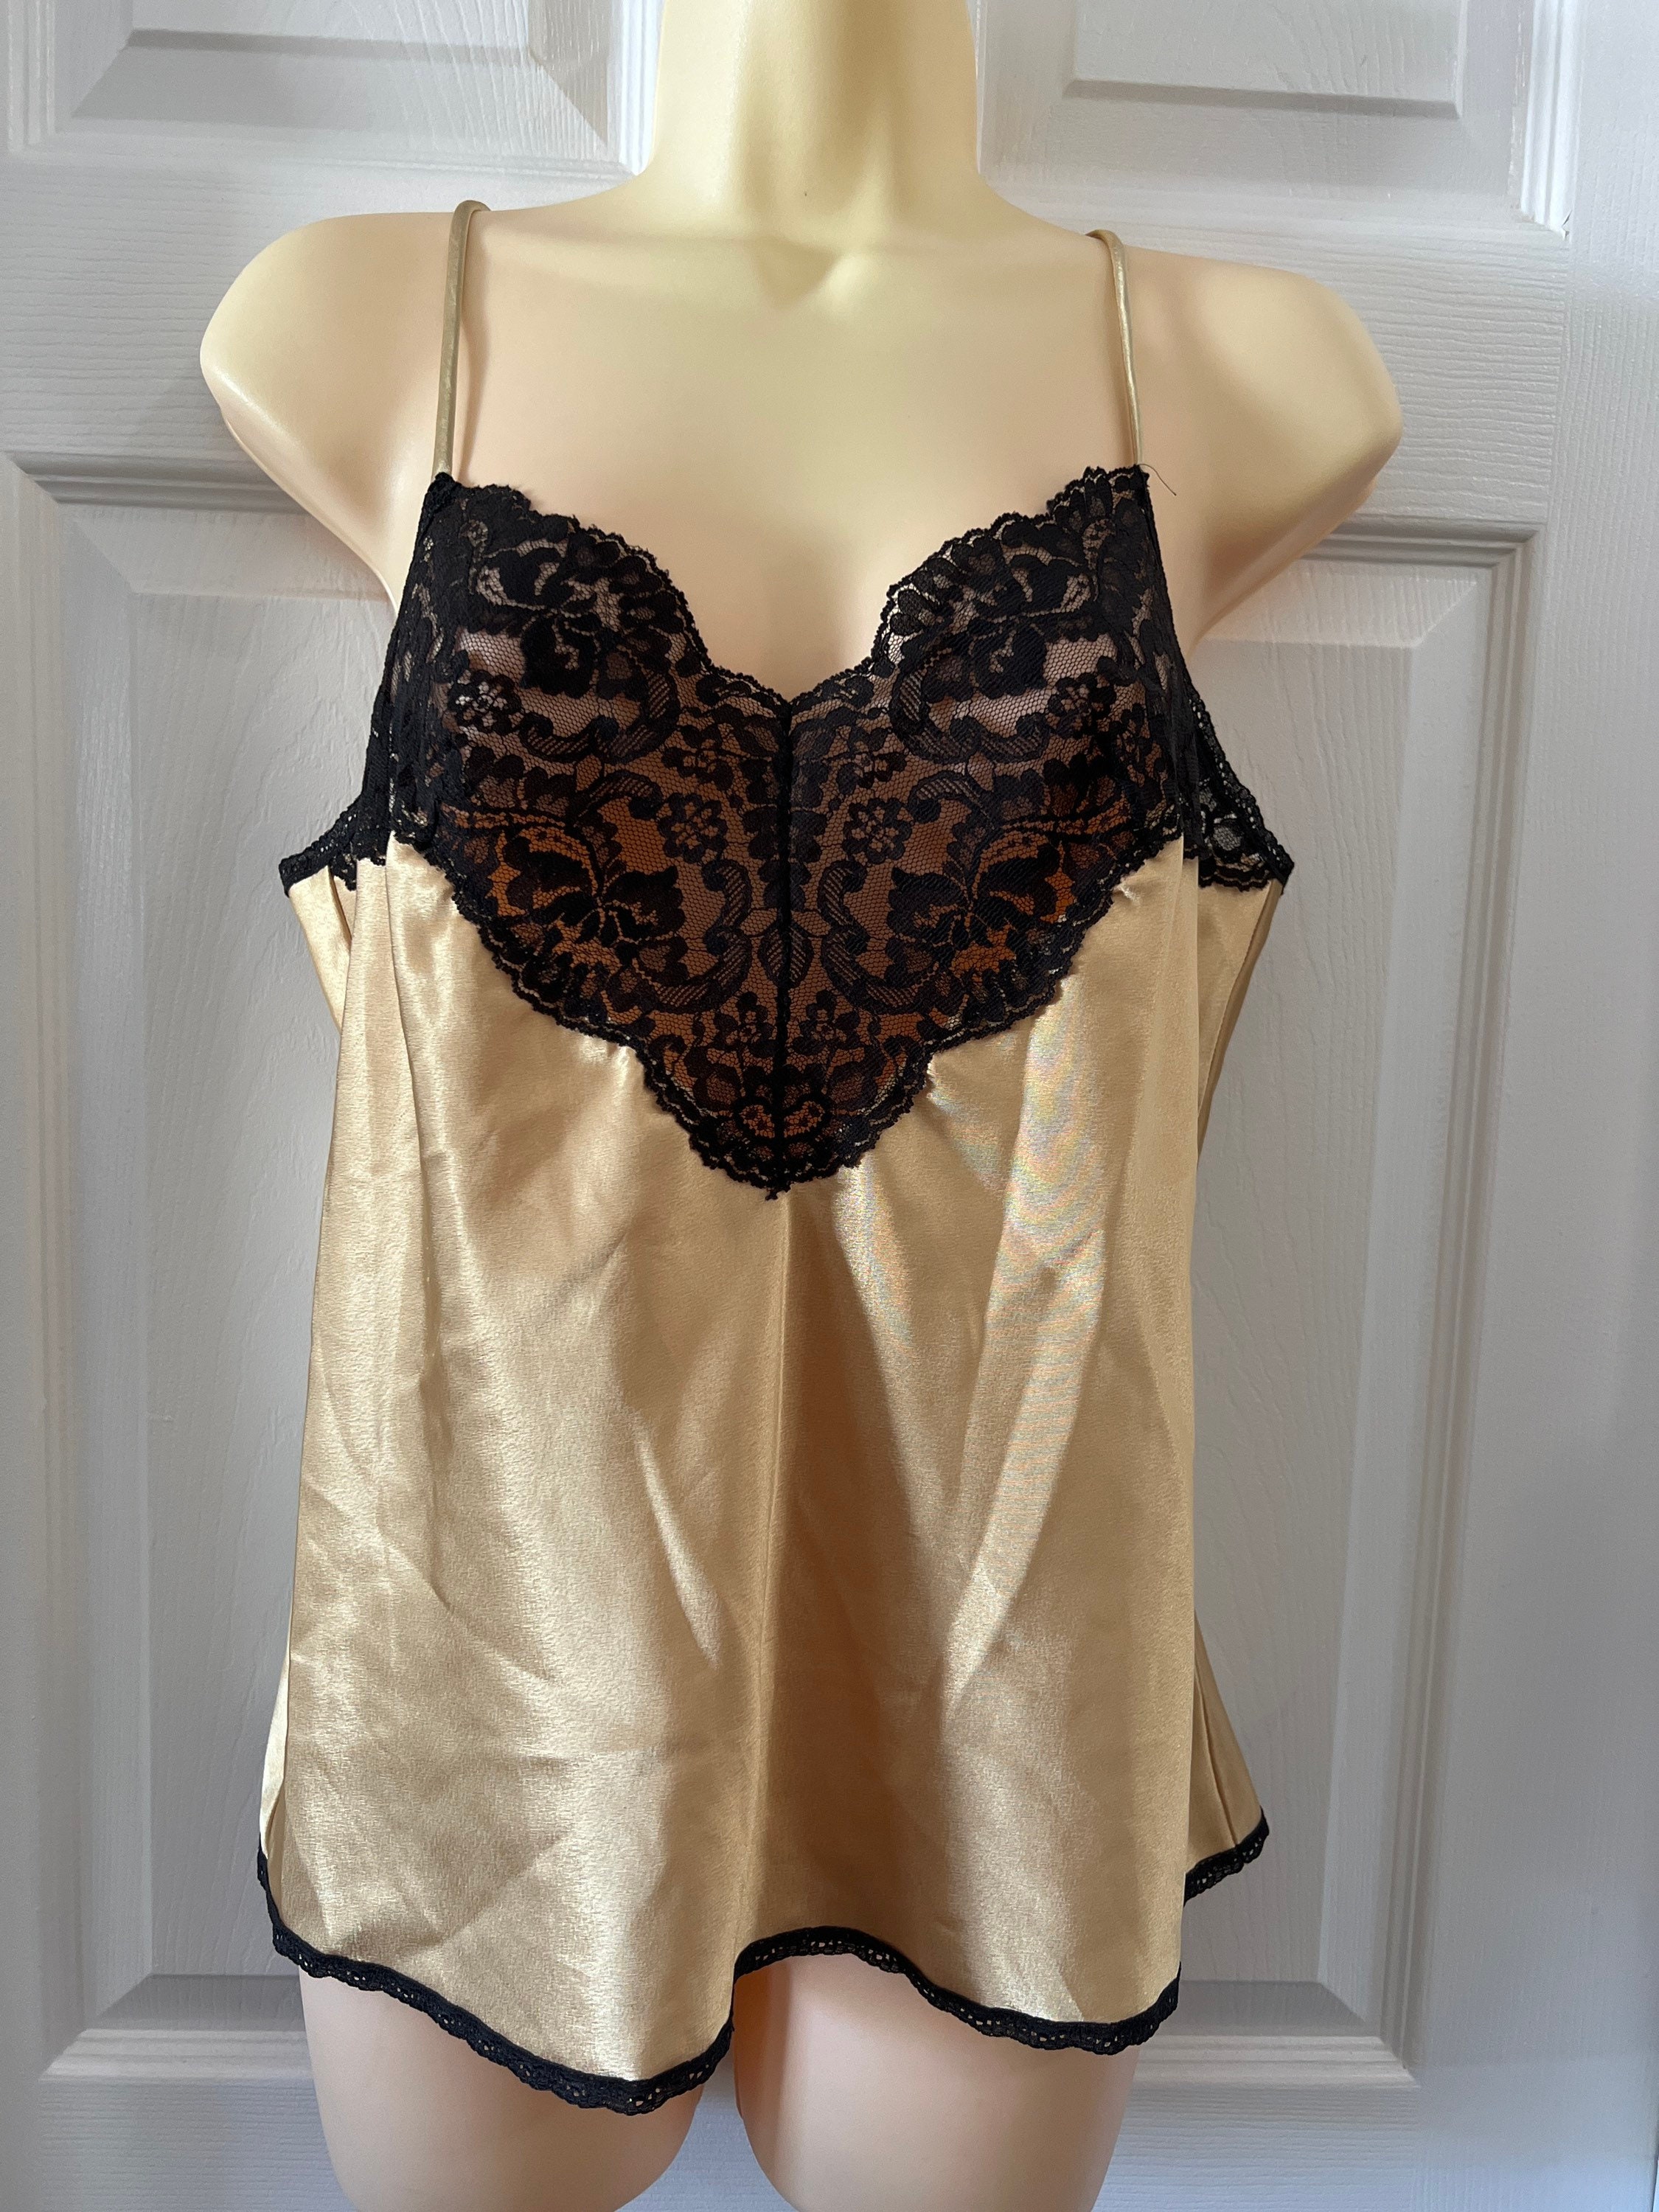 Vintage Vanity Fair Gold Lace Trimmed Camisole Top Size 36 